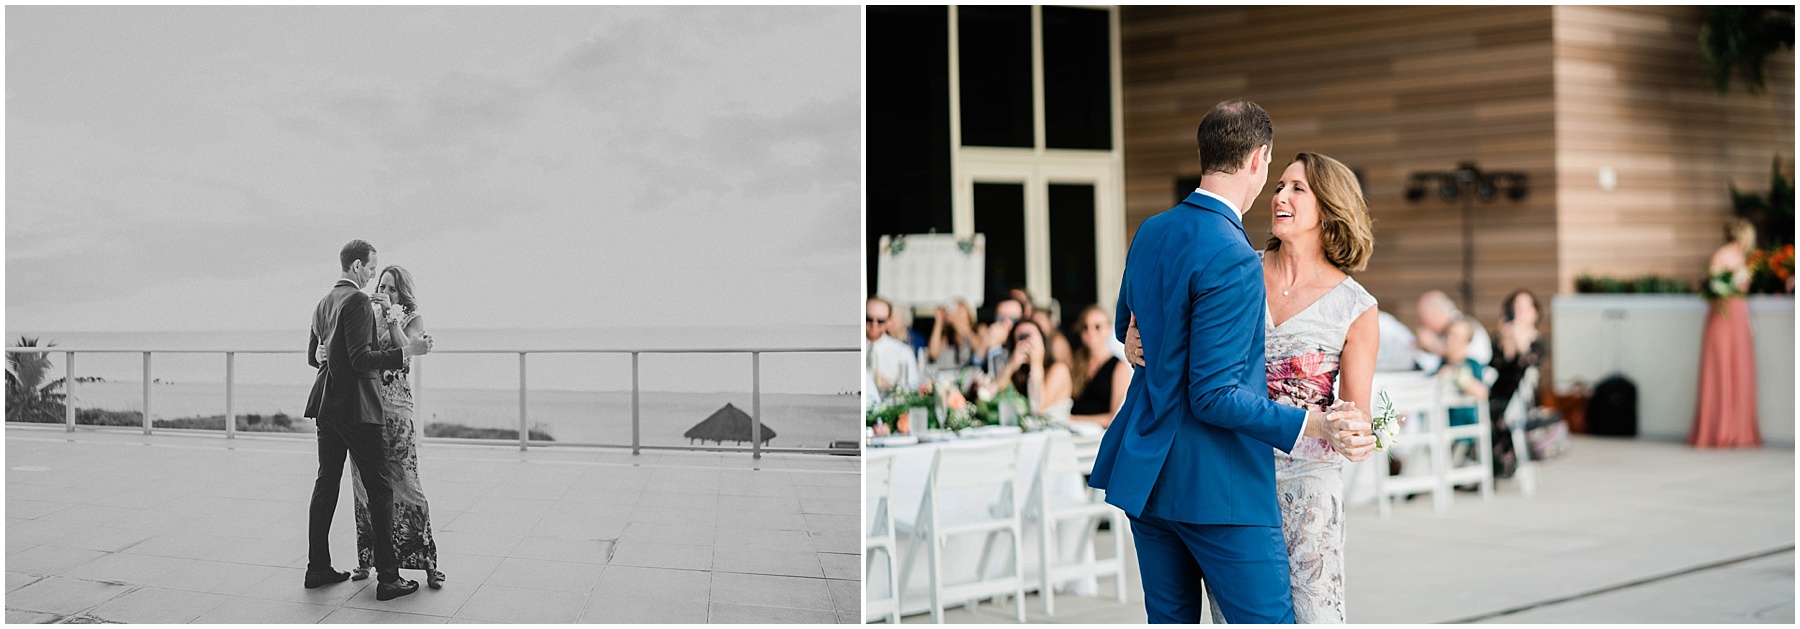 Groom and mother dance on rooftop at JW Marriott Marco Island in Florida.